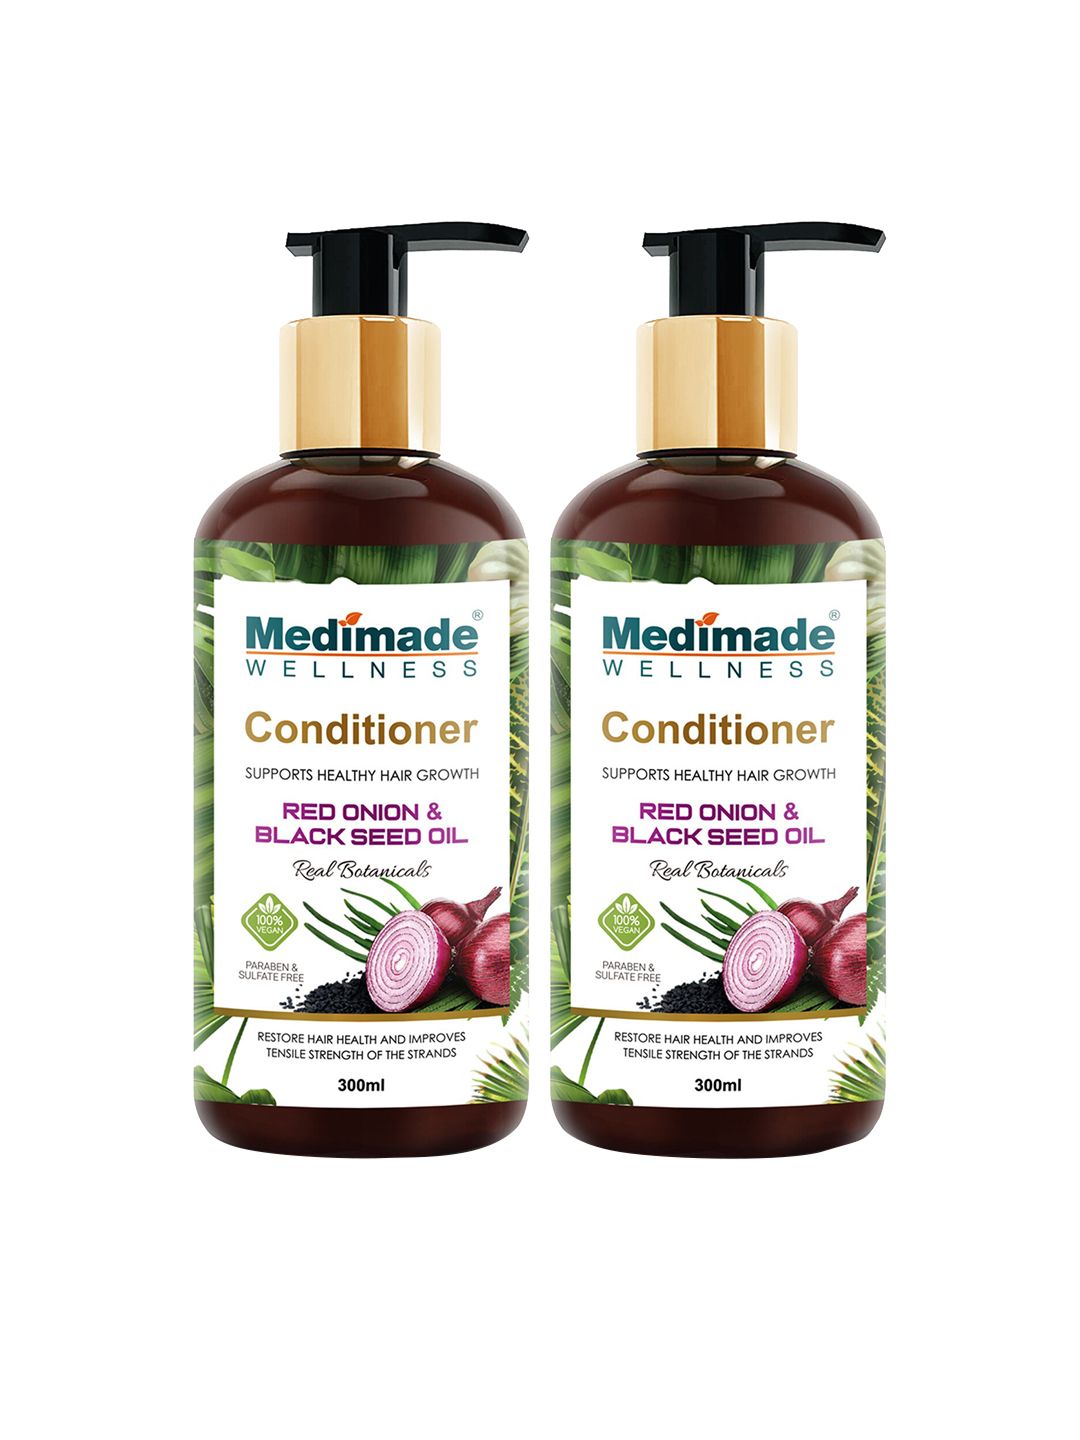 Medimade Set of 2 Red Onion Black Seed Oil Hair Conditioner for Hair Growth - 300 ml each Price in India